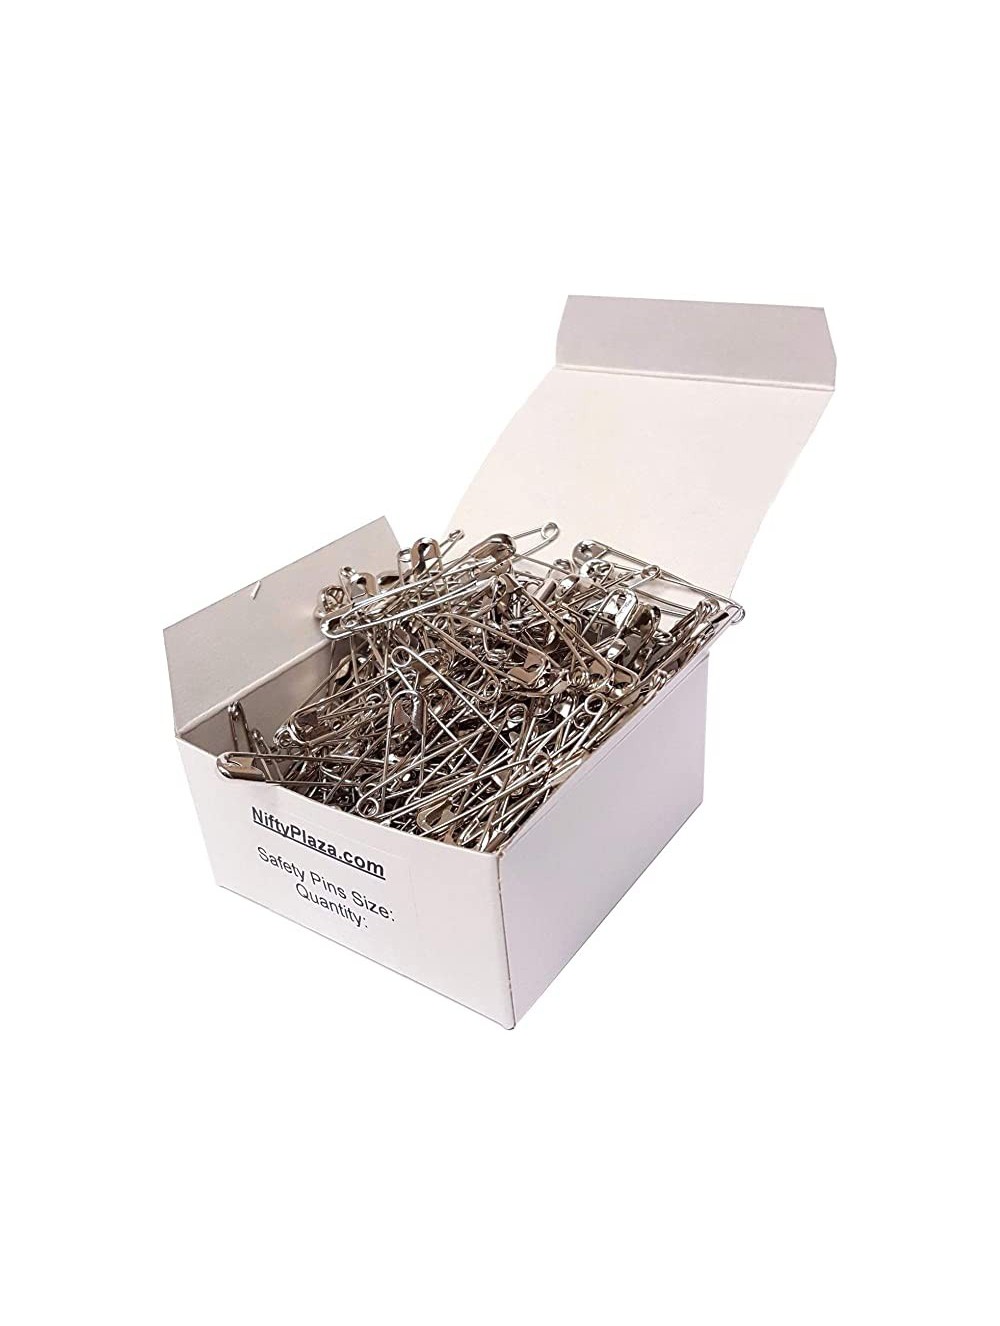 SILVER SAFETY PINS 50 mm (No 3) STEEL wholesale